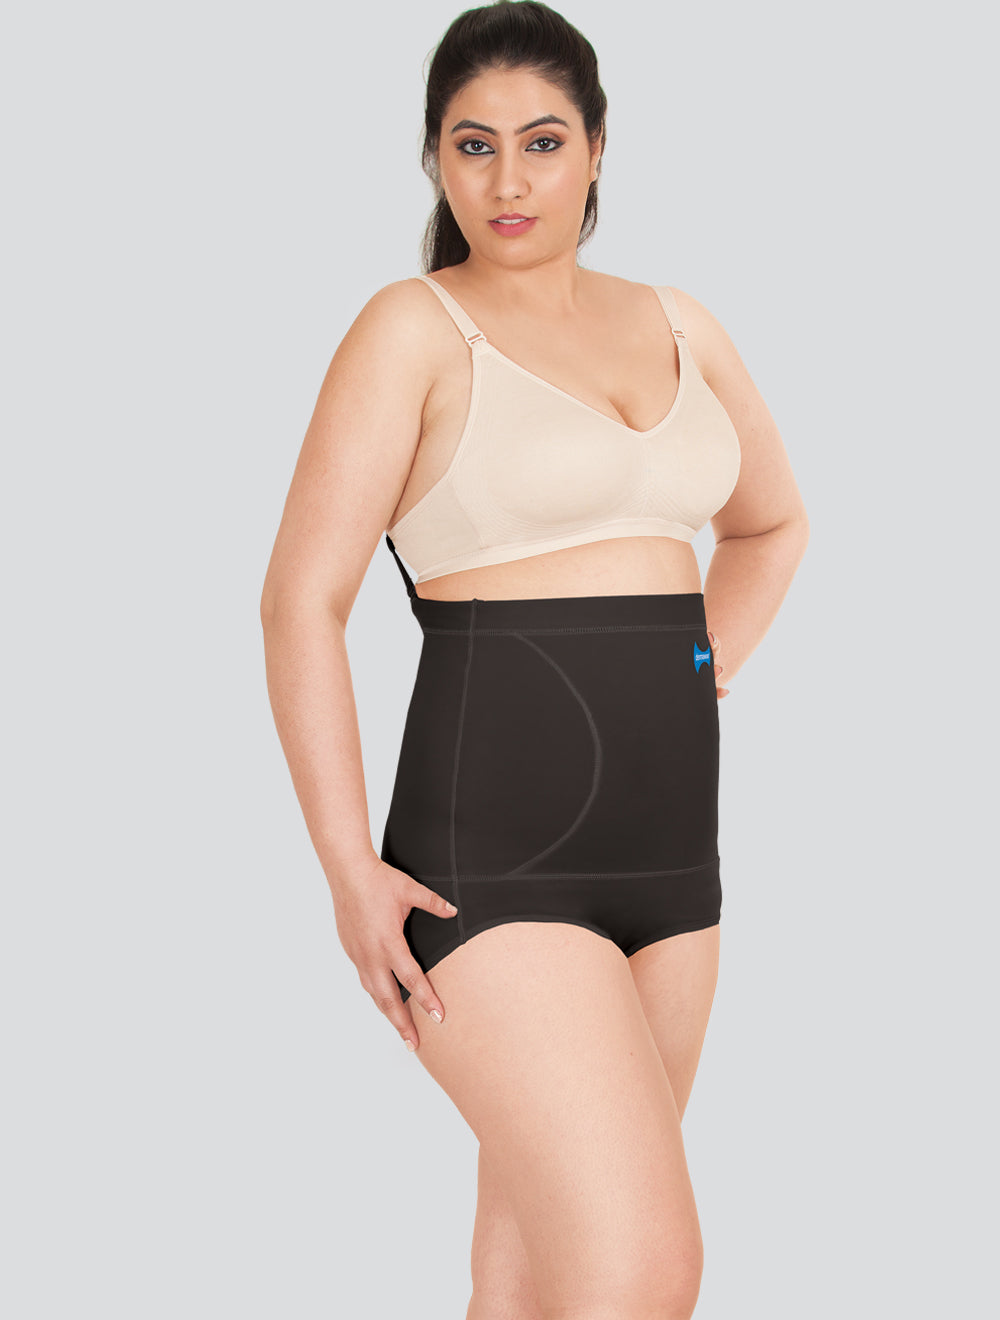 Dermawear Shapewear - Get Best Price from Manufacturers